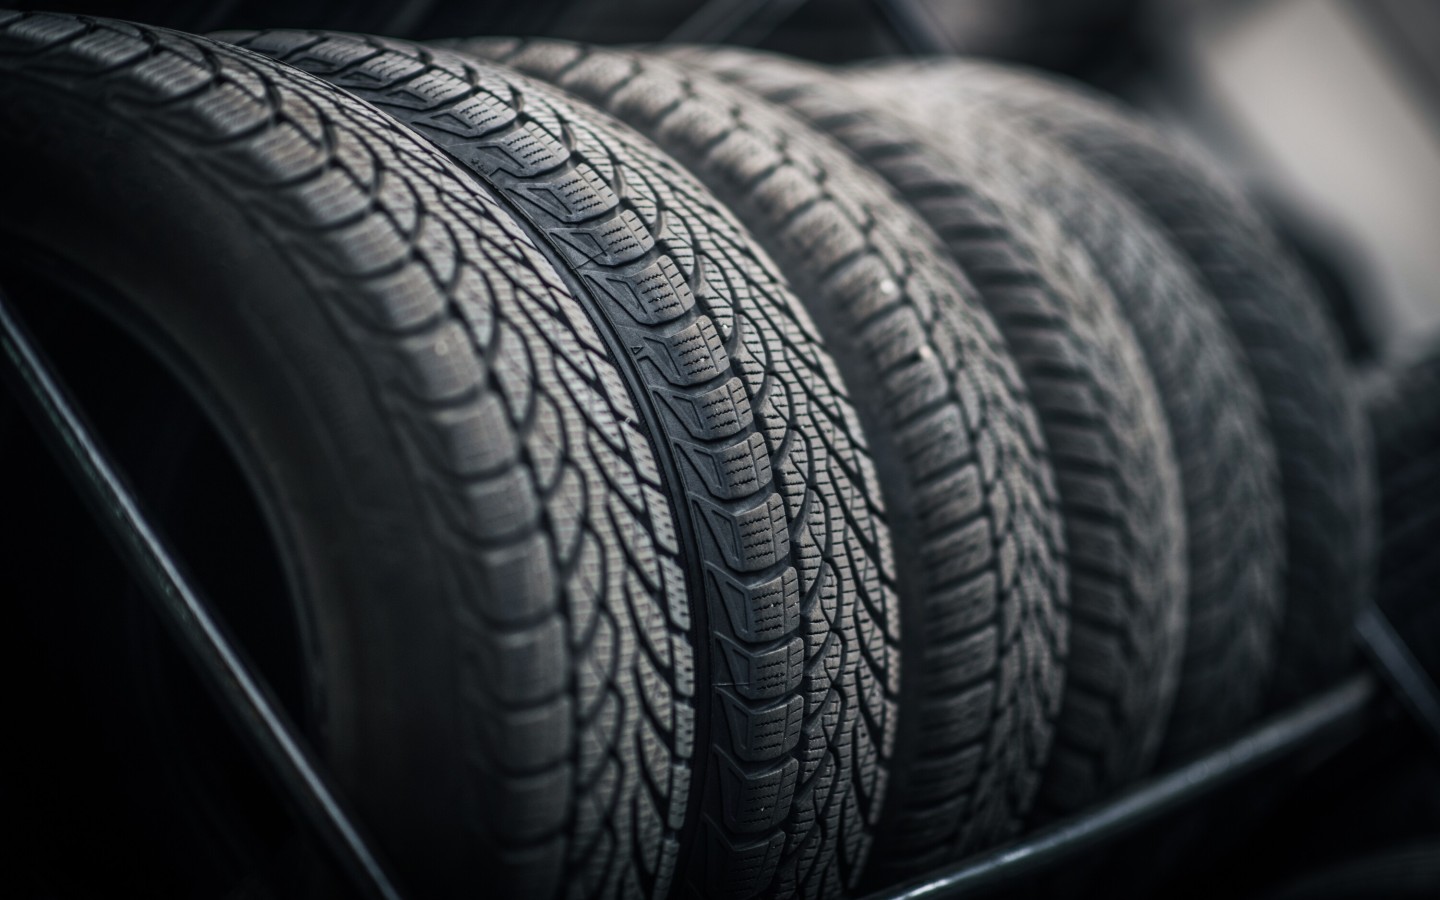 What are airless tyres?